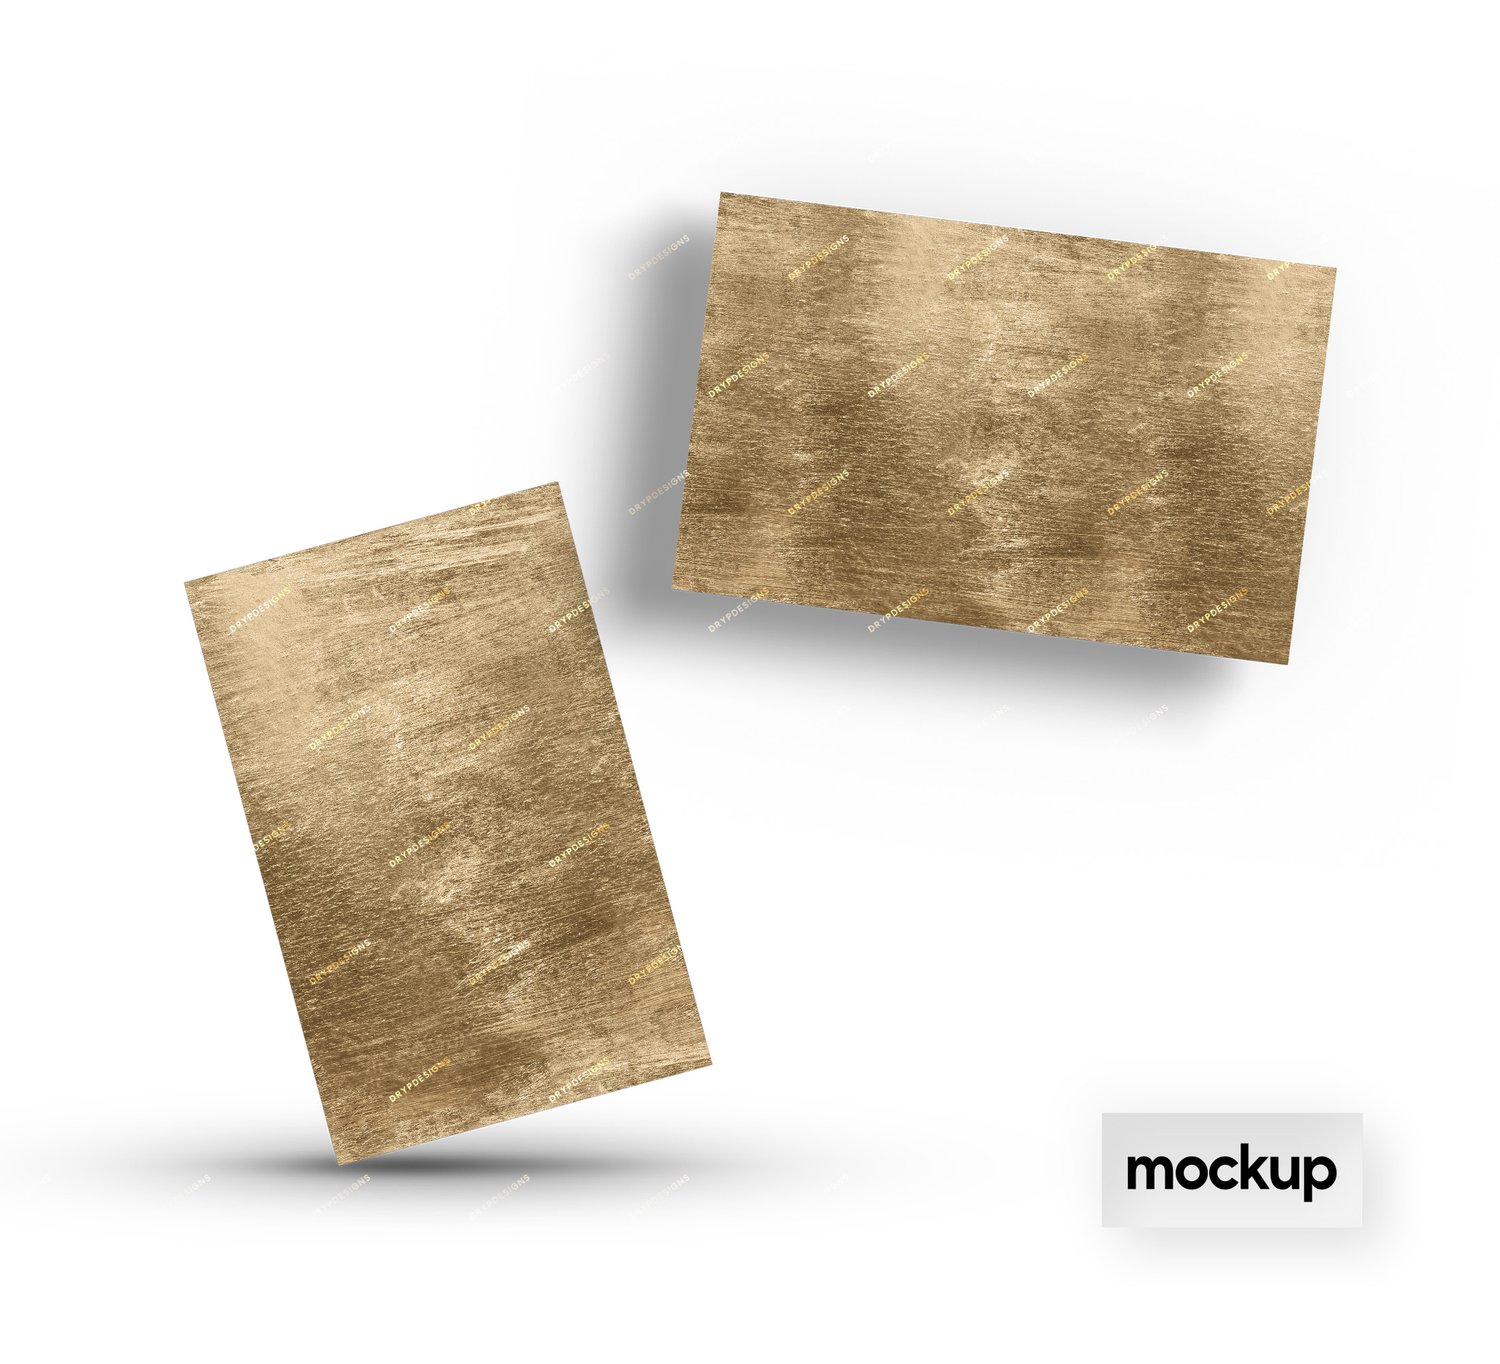 Brushed Gold Metal Seamless Digital Paper Background — drypdesigns